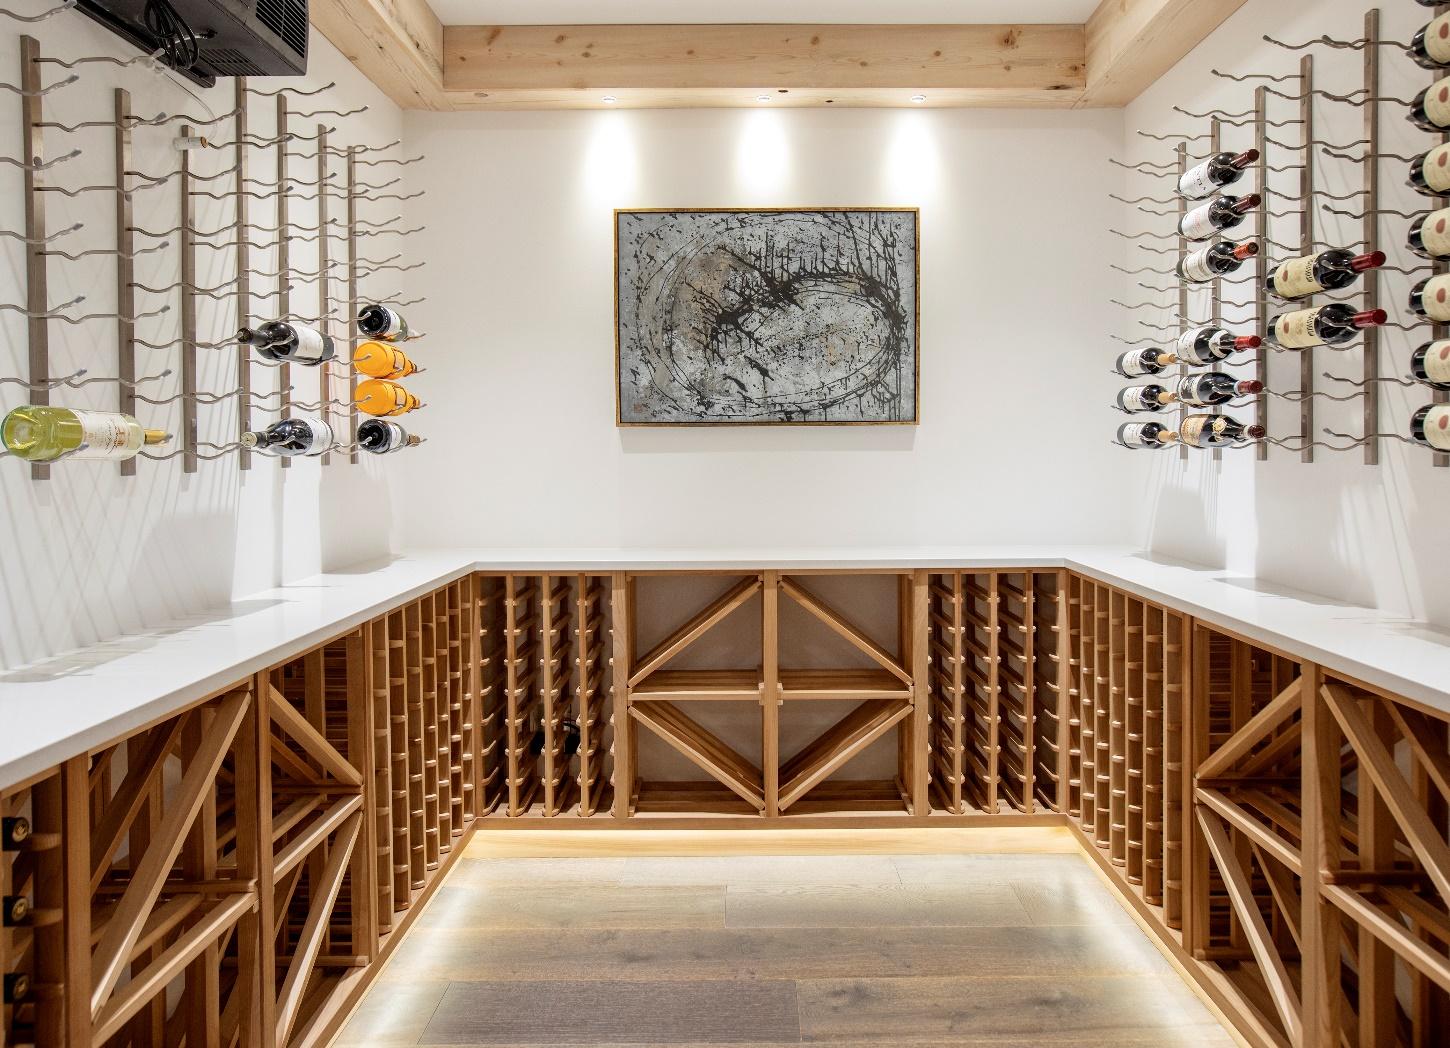 A room with wine racks and a painting on the wall

Description automatically generated